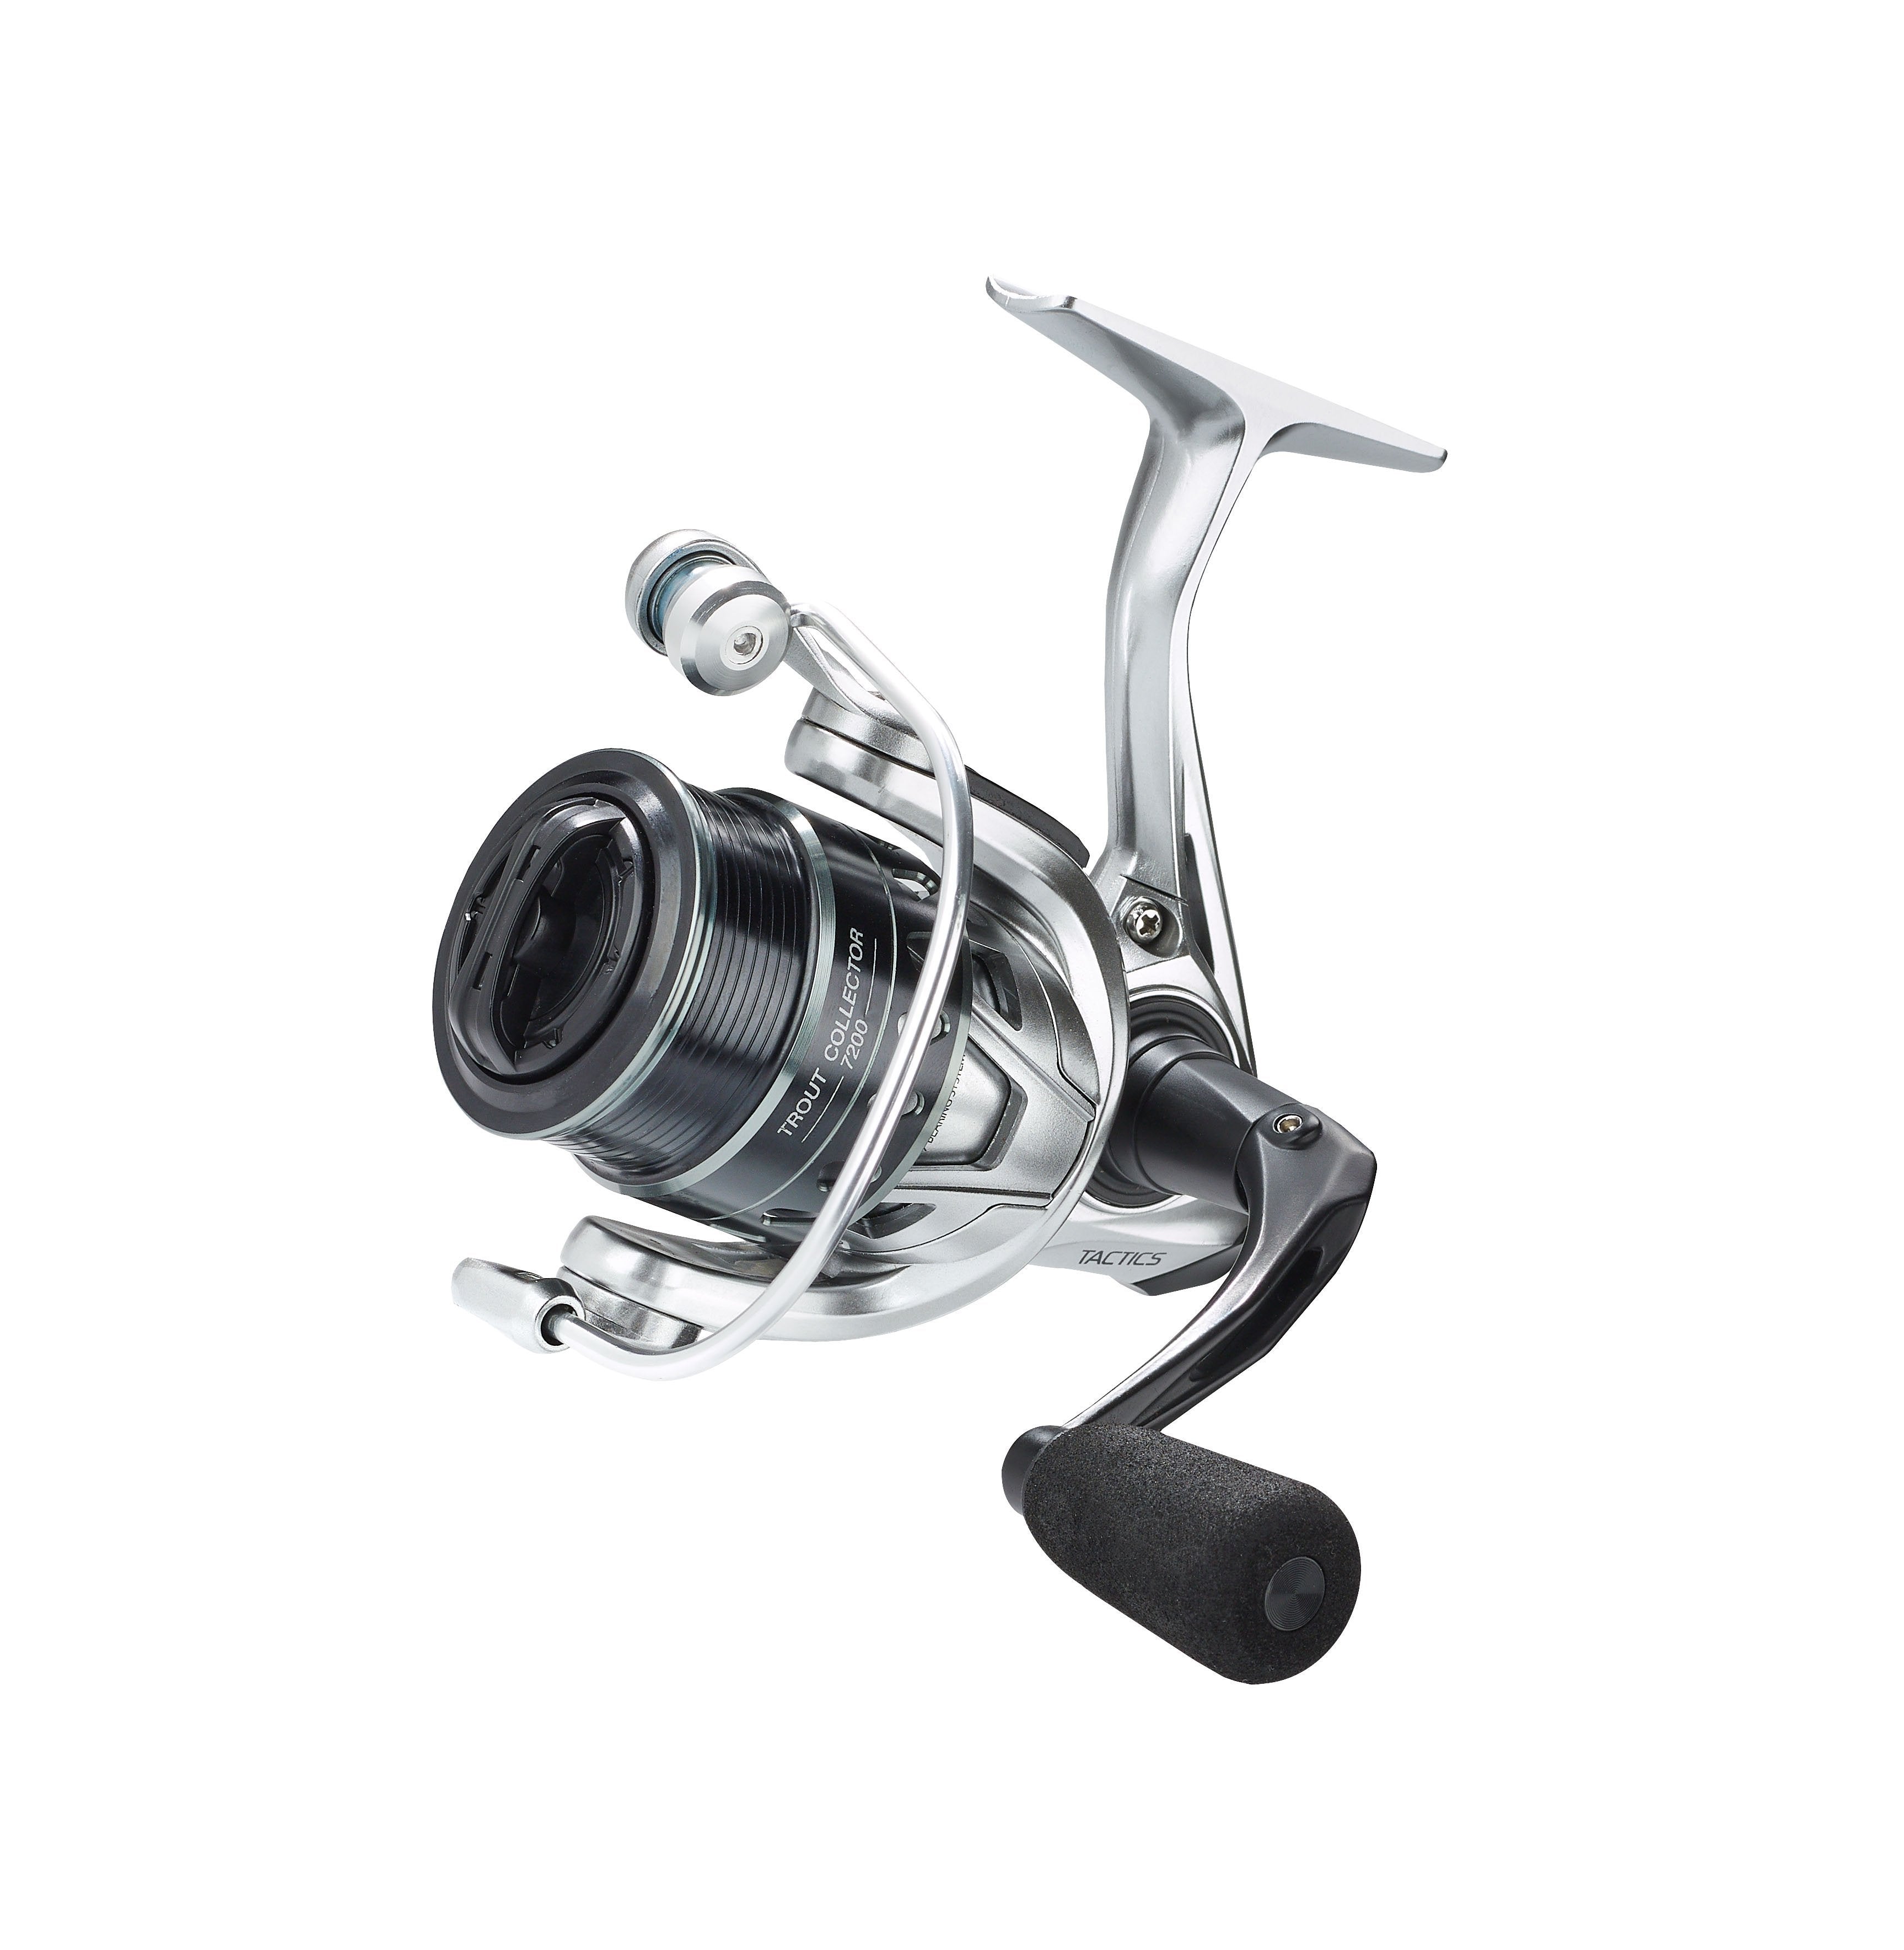 Our Best Trout Spinning Reel - Tactics Trout Collector